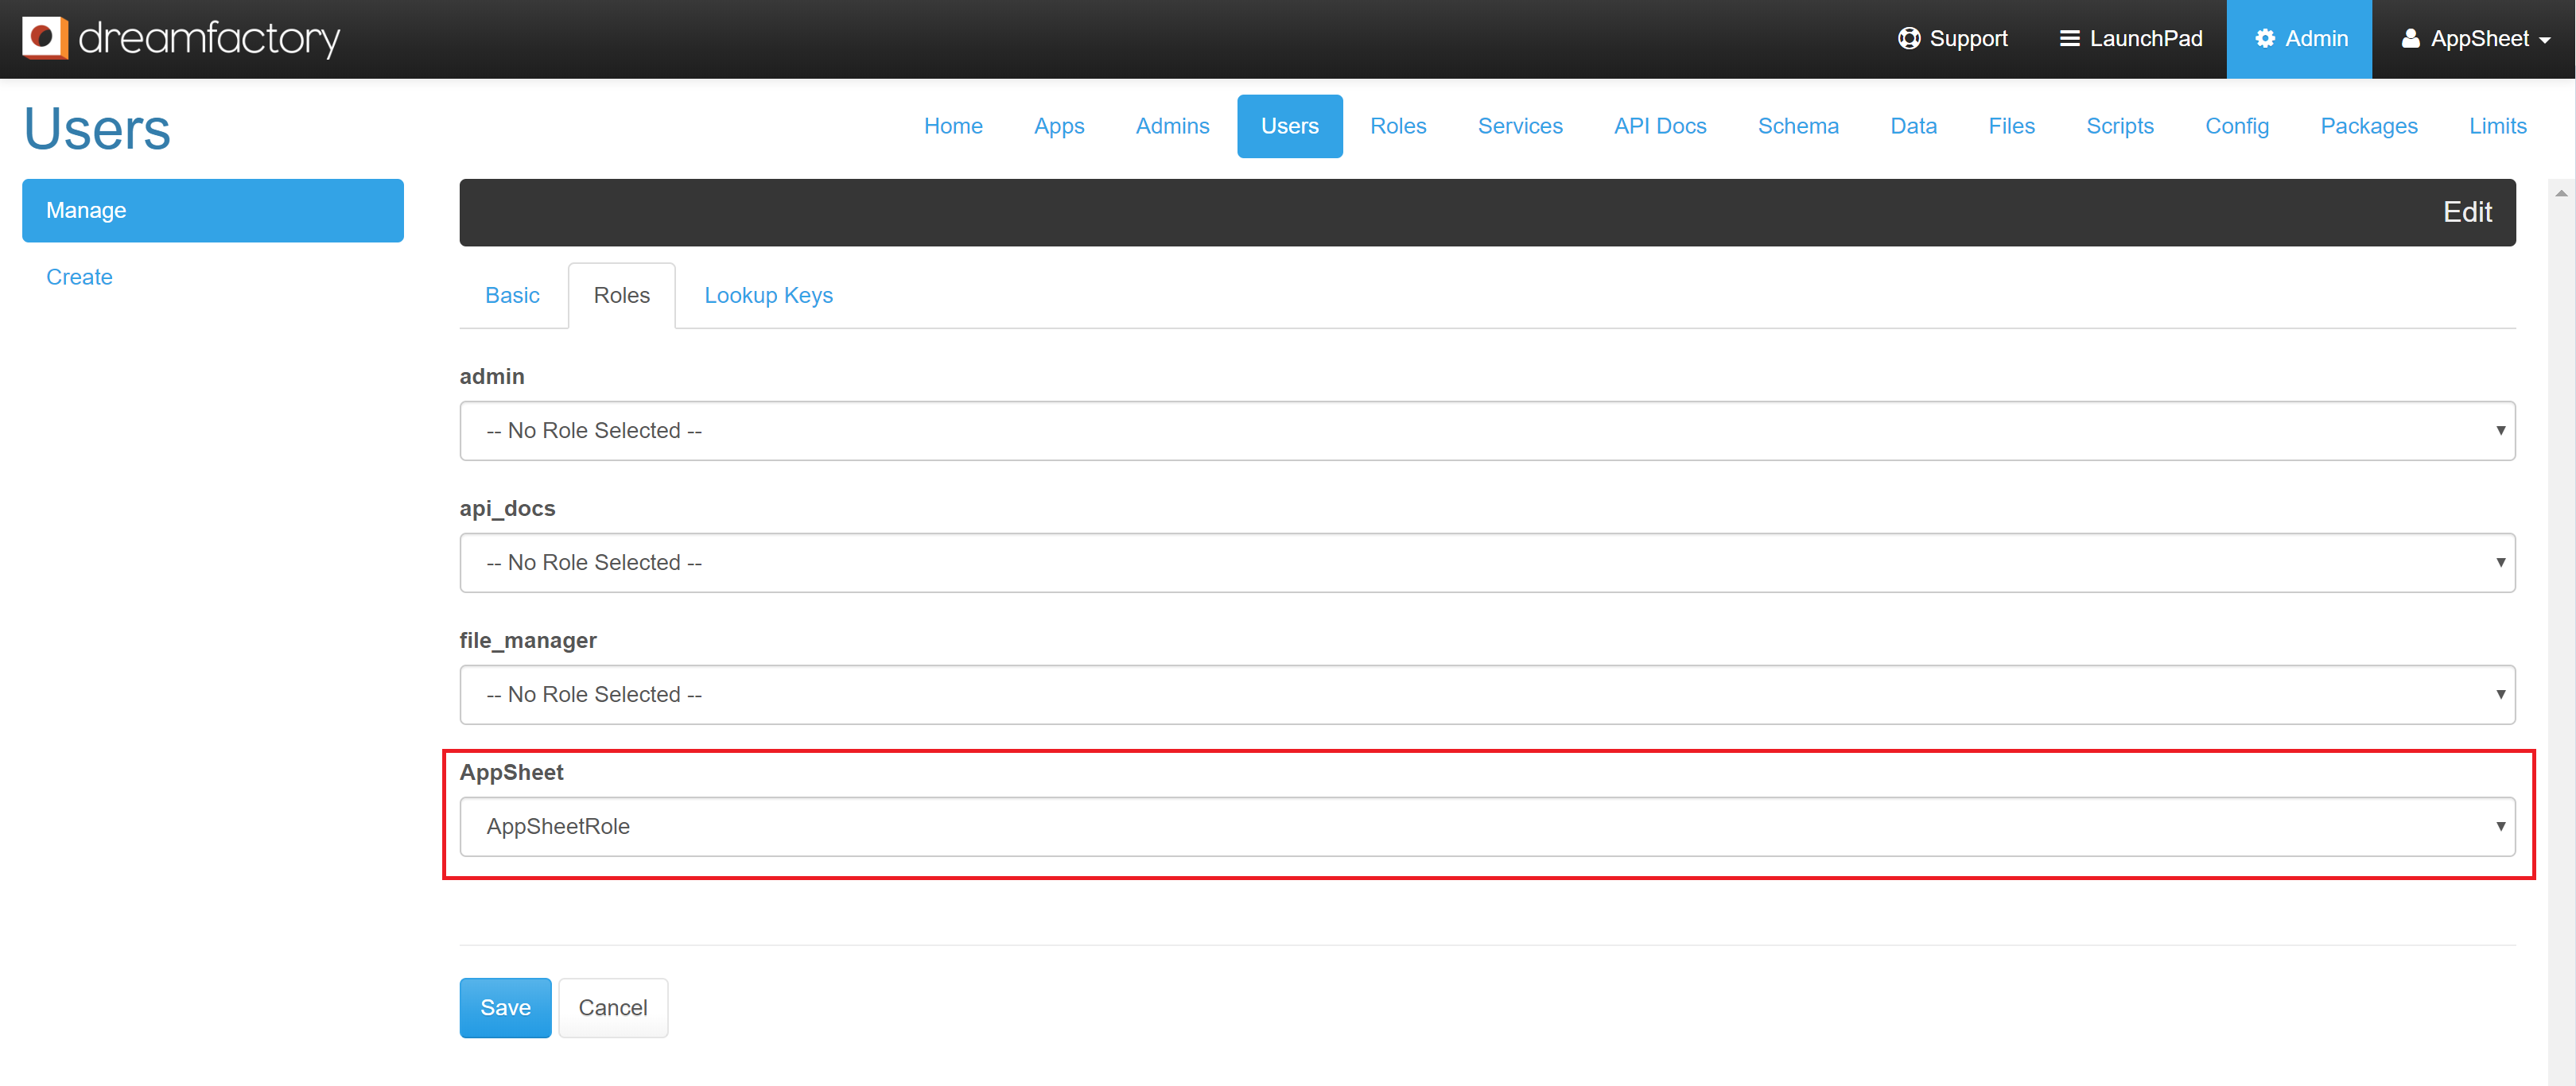 Verify that AppSheet has been correctly registered in your DreamFactory instance